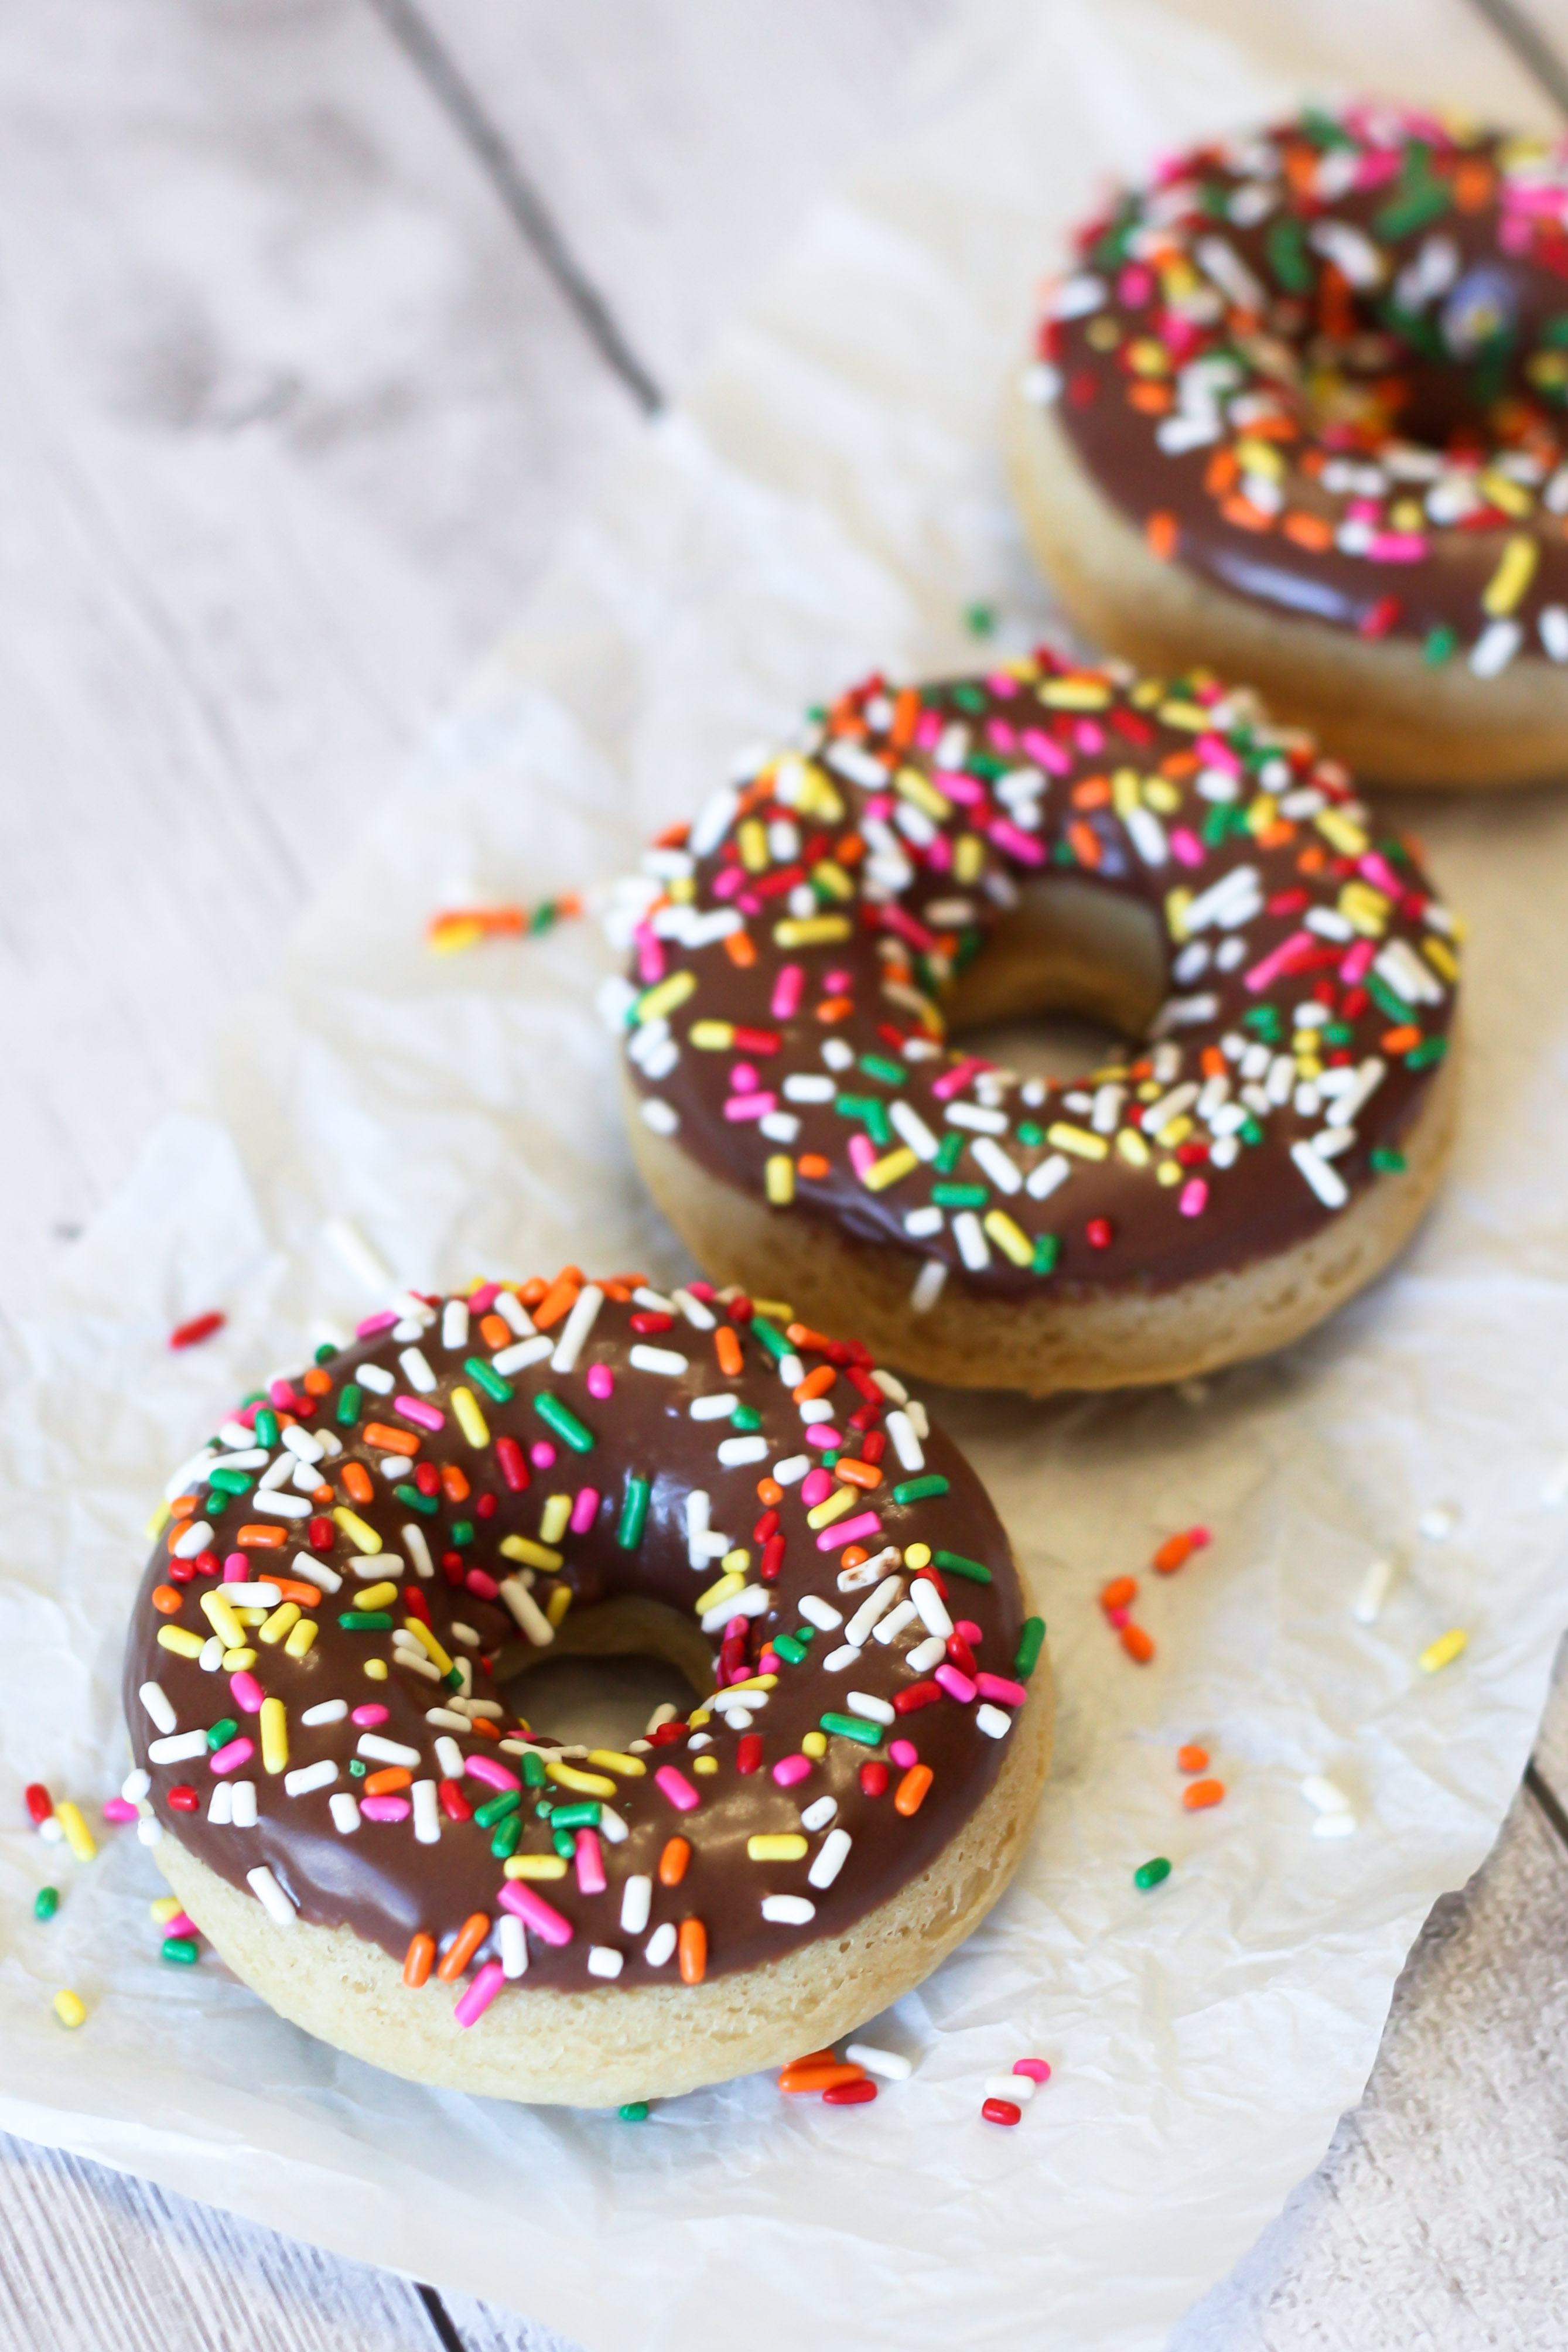 gluten free vegan chocolate frosted baked donuts - Sarah ... - 2677 x 4015 jpeg 1096kB